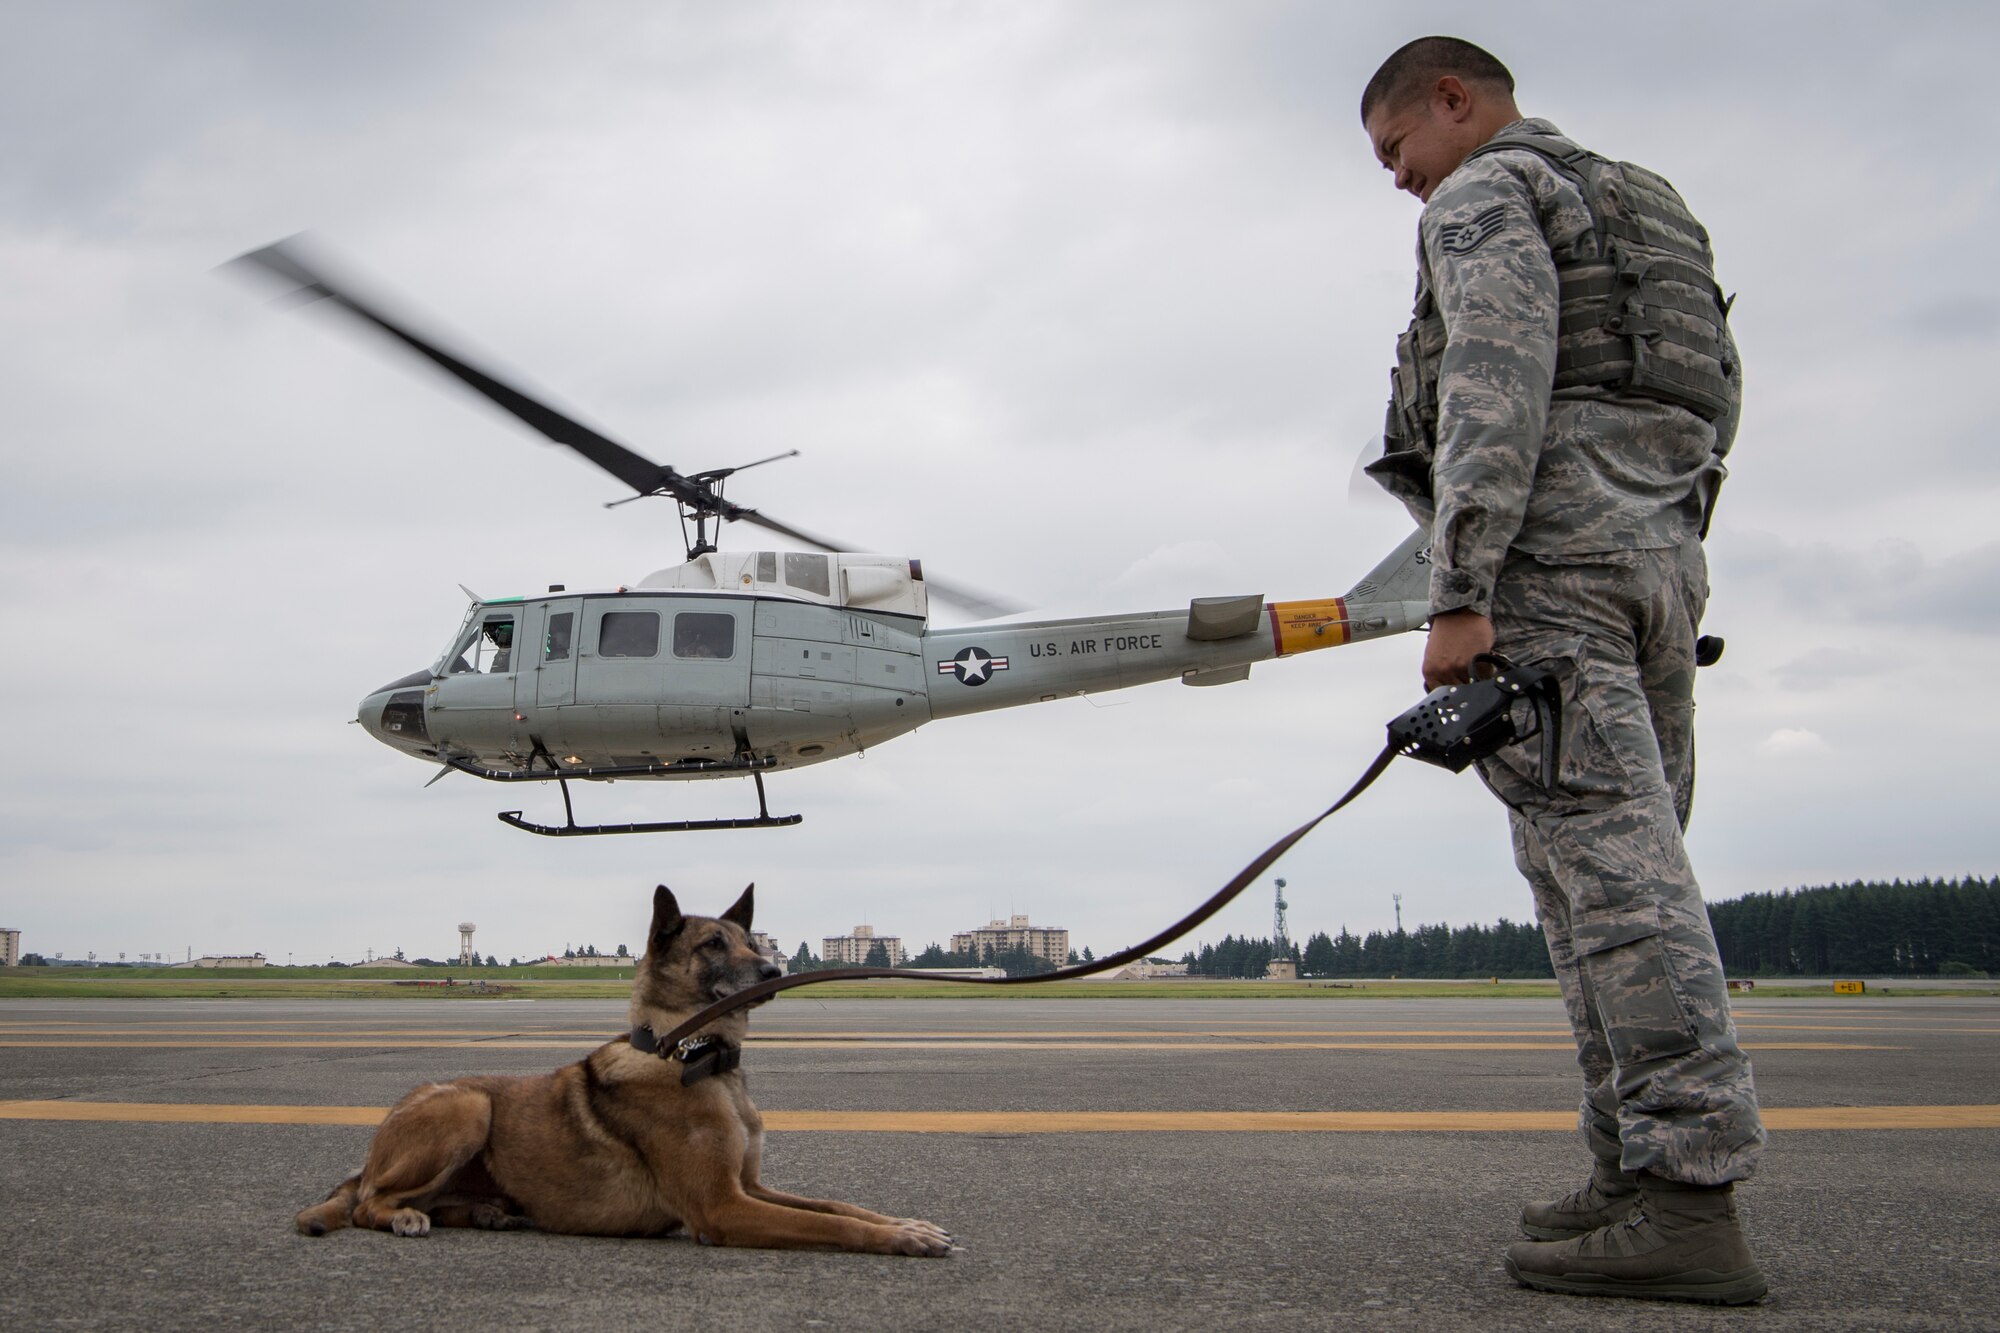 Staff Sgt. Michael Dacoron, 374th Security Forces Squadron military working dog handler, watches with Diesel, 374 SFS MWD, as a UH-1N helicopter takes off during a 459th Airlift Squadron MWD familiarization flight July 26, 2018, at Yokota Air Base, Japan.